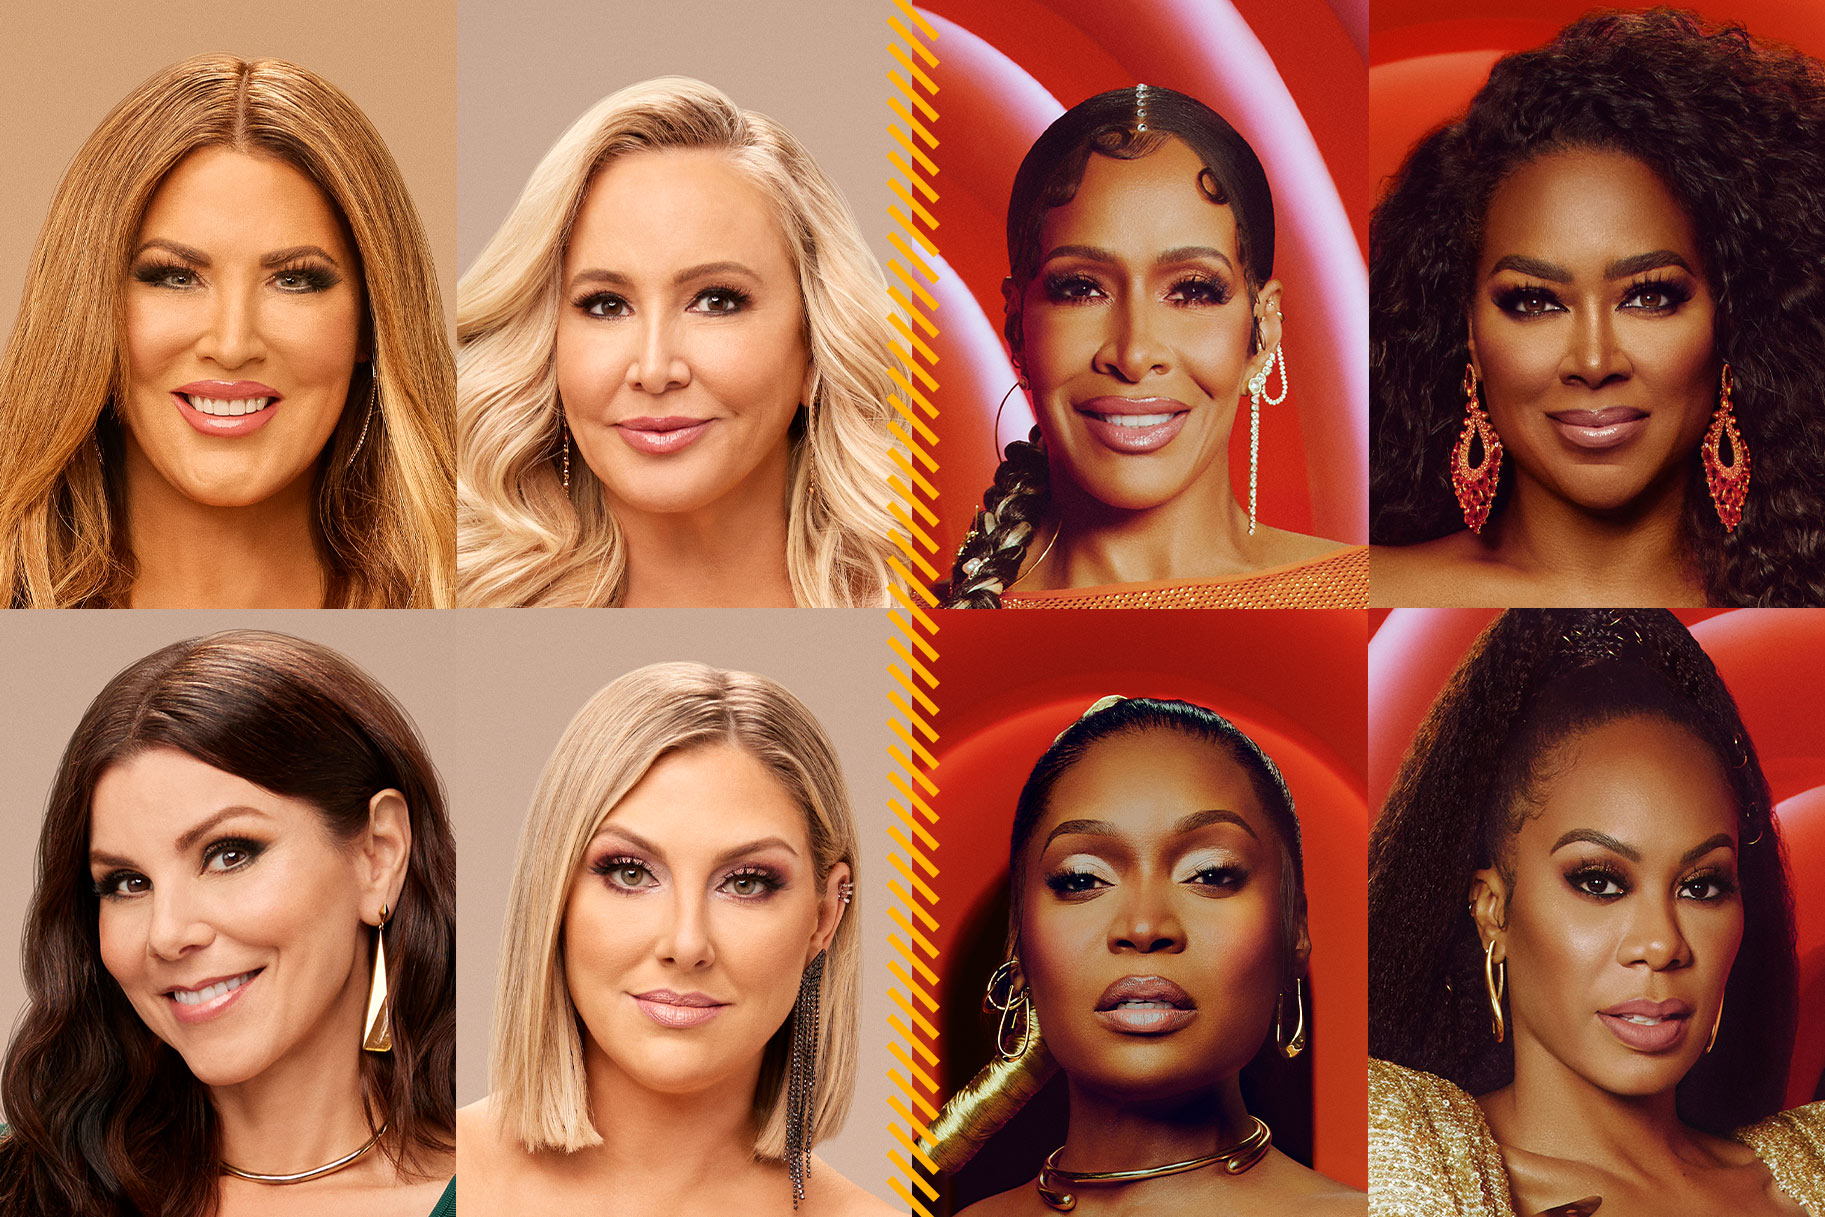 Real Housewives of Orange County and Real Housewives of Atlanta cast photos.